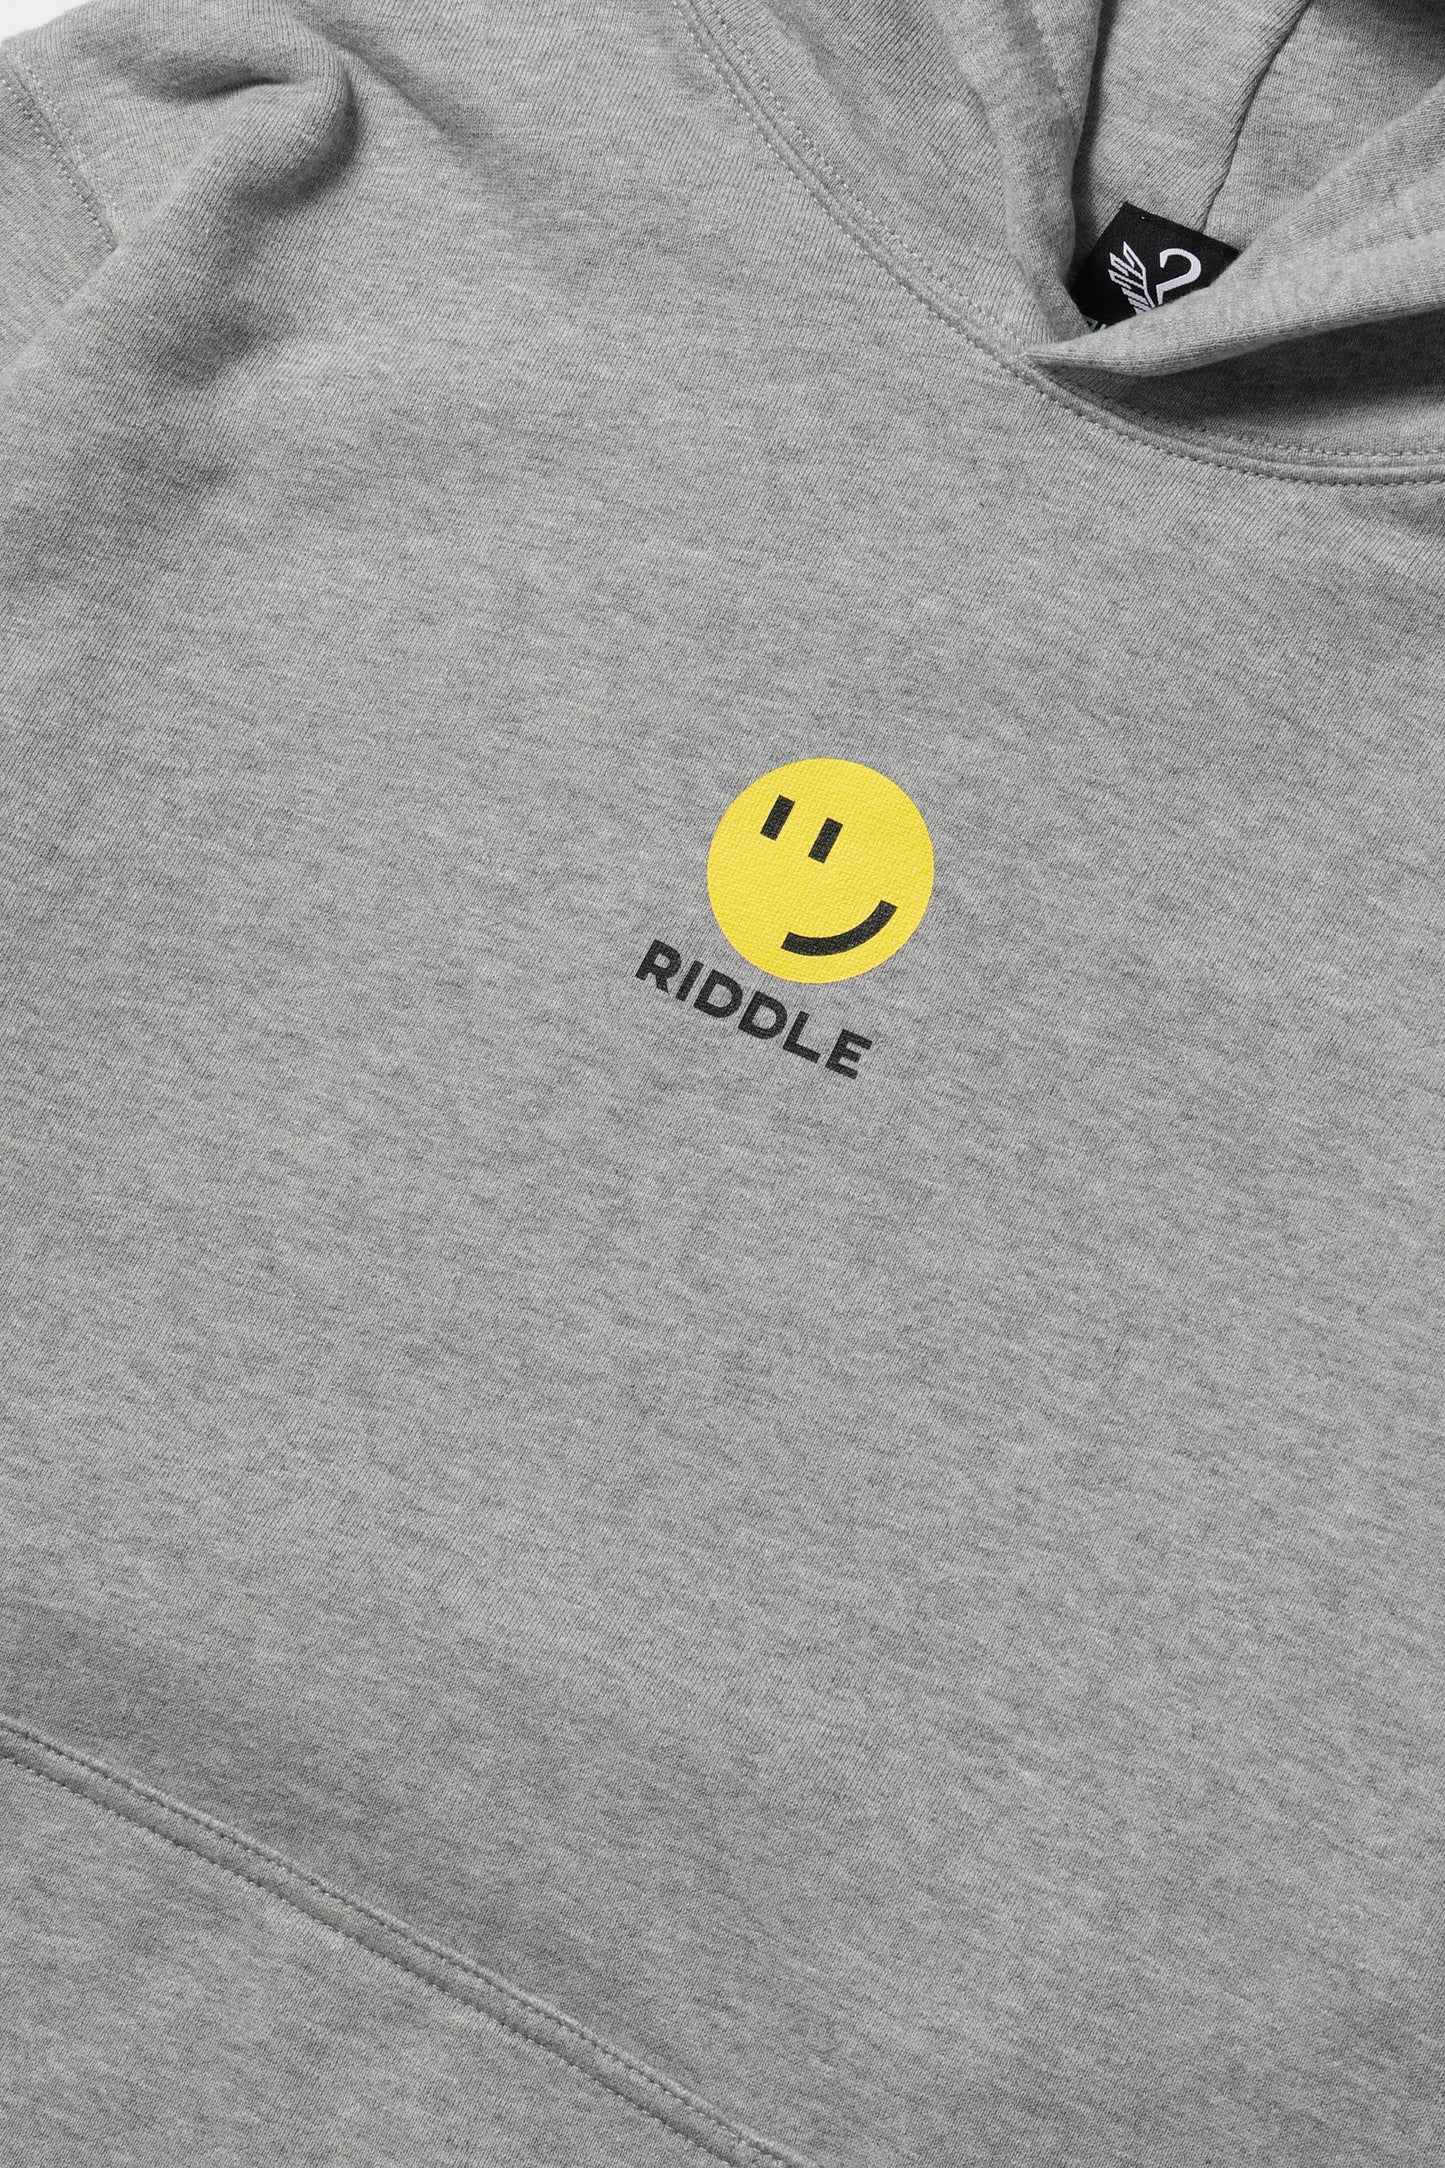 RIDDLE WANTED HOODIE / GRY